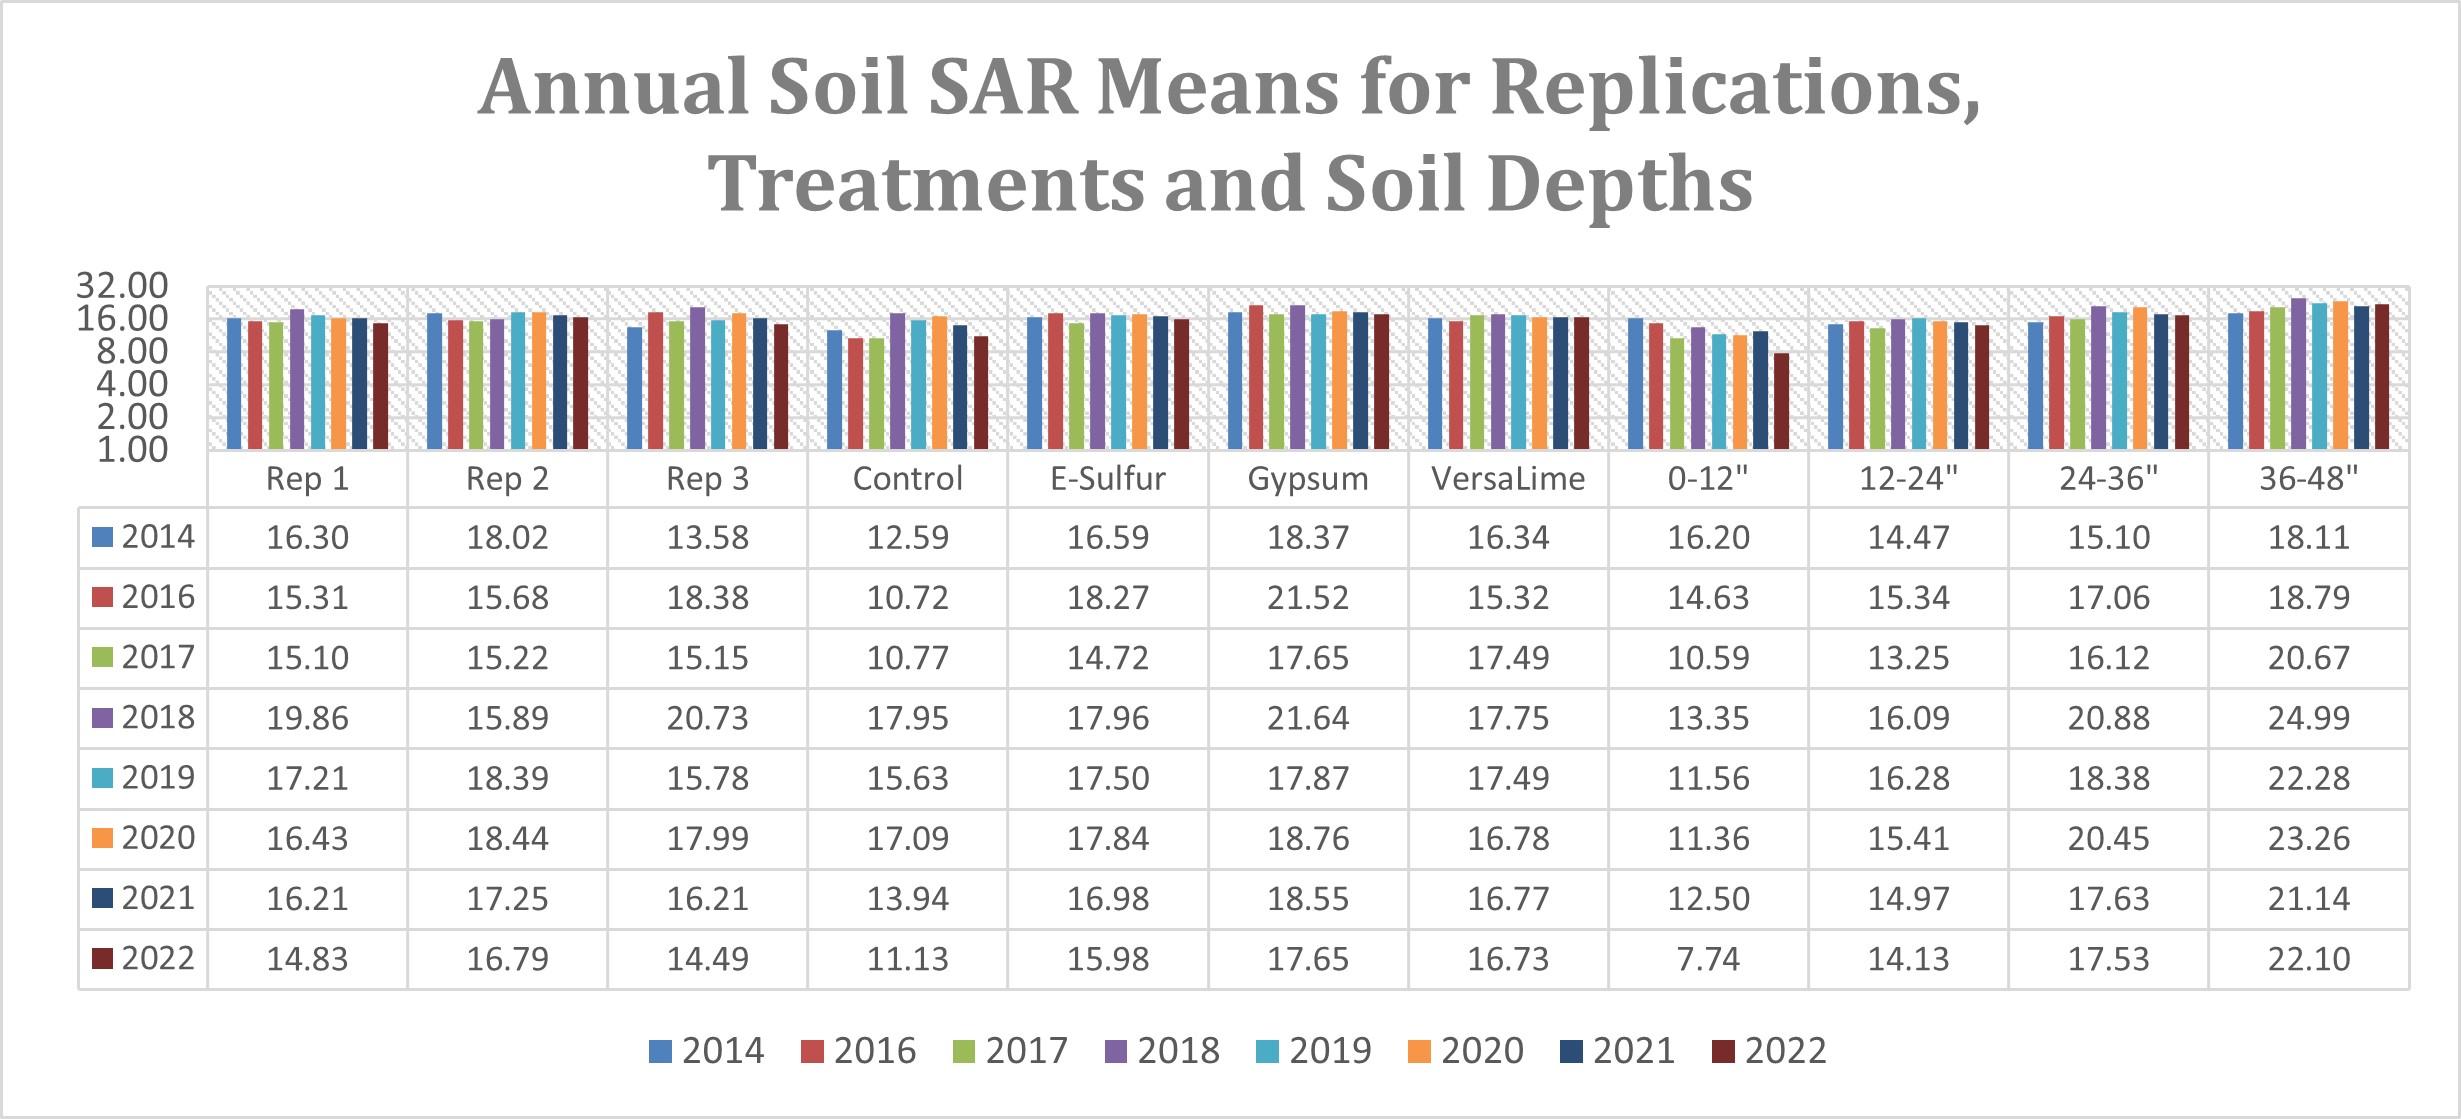 Annual Soil SAR Means for Replications, Treatments and Soil Depths 2014, 2016-2022